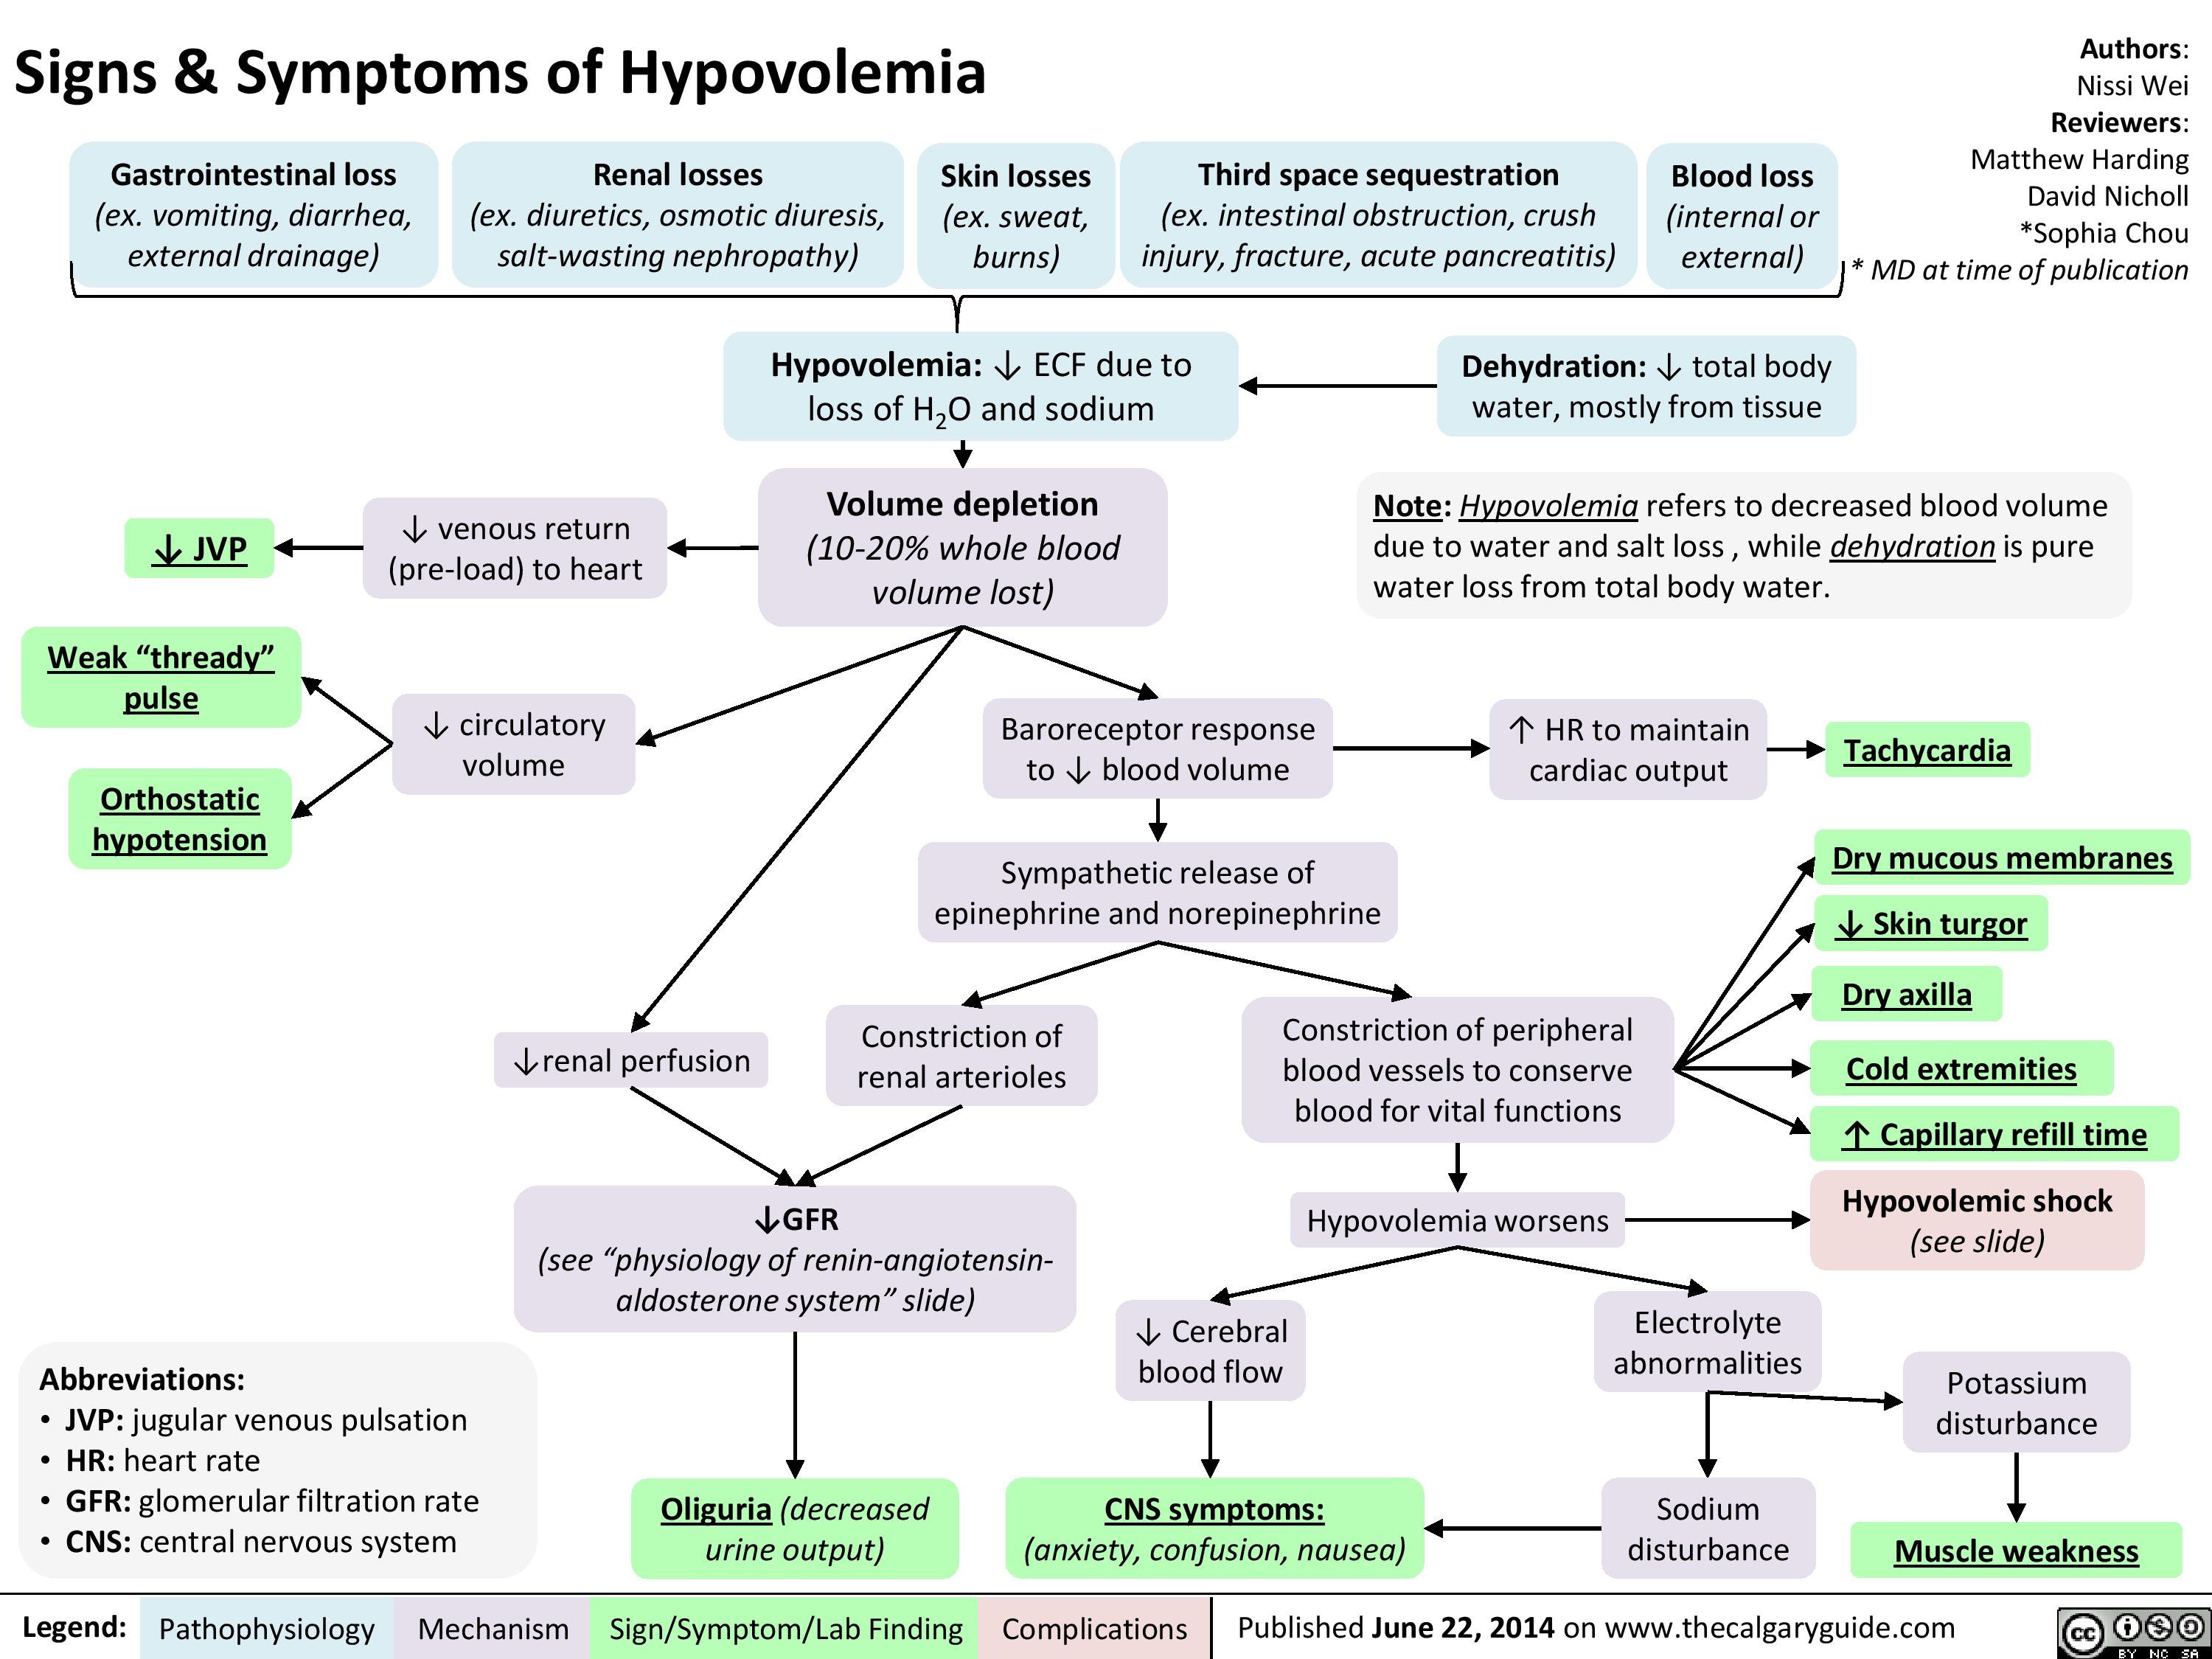 Signs and Symptoms of Hypovolemia